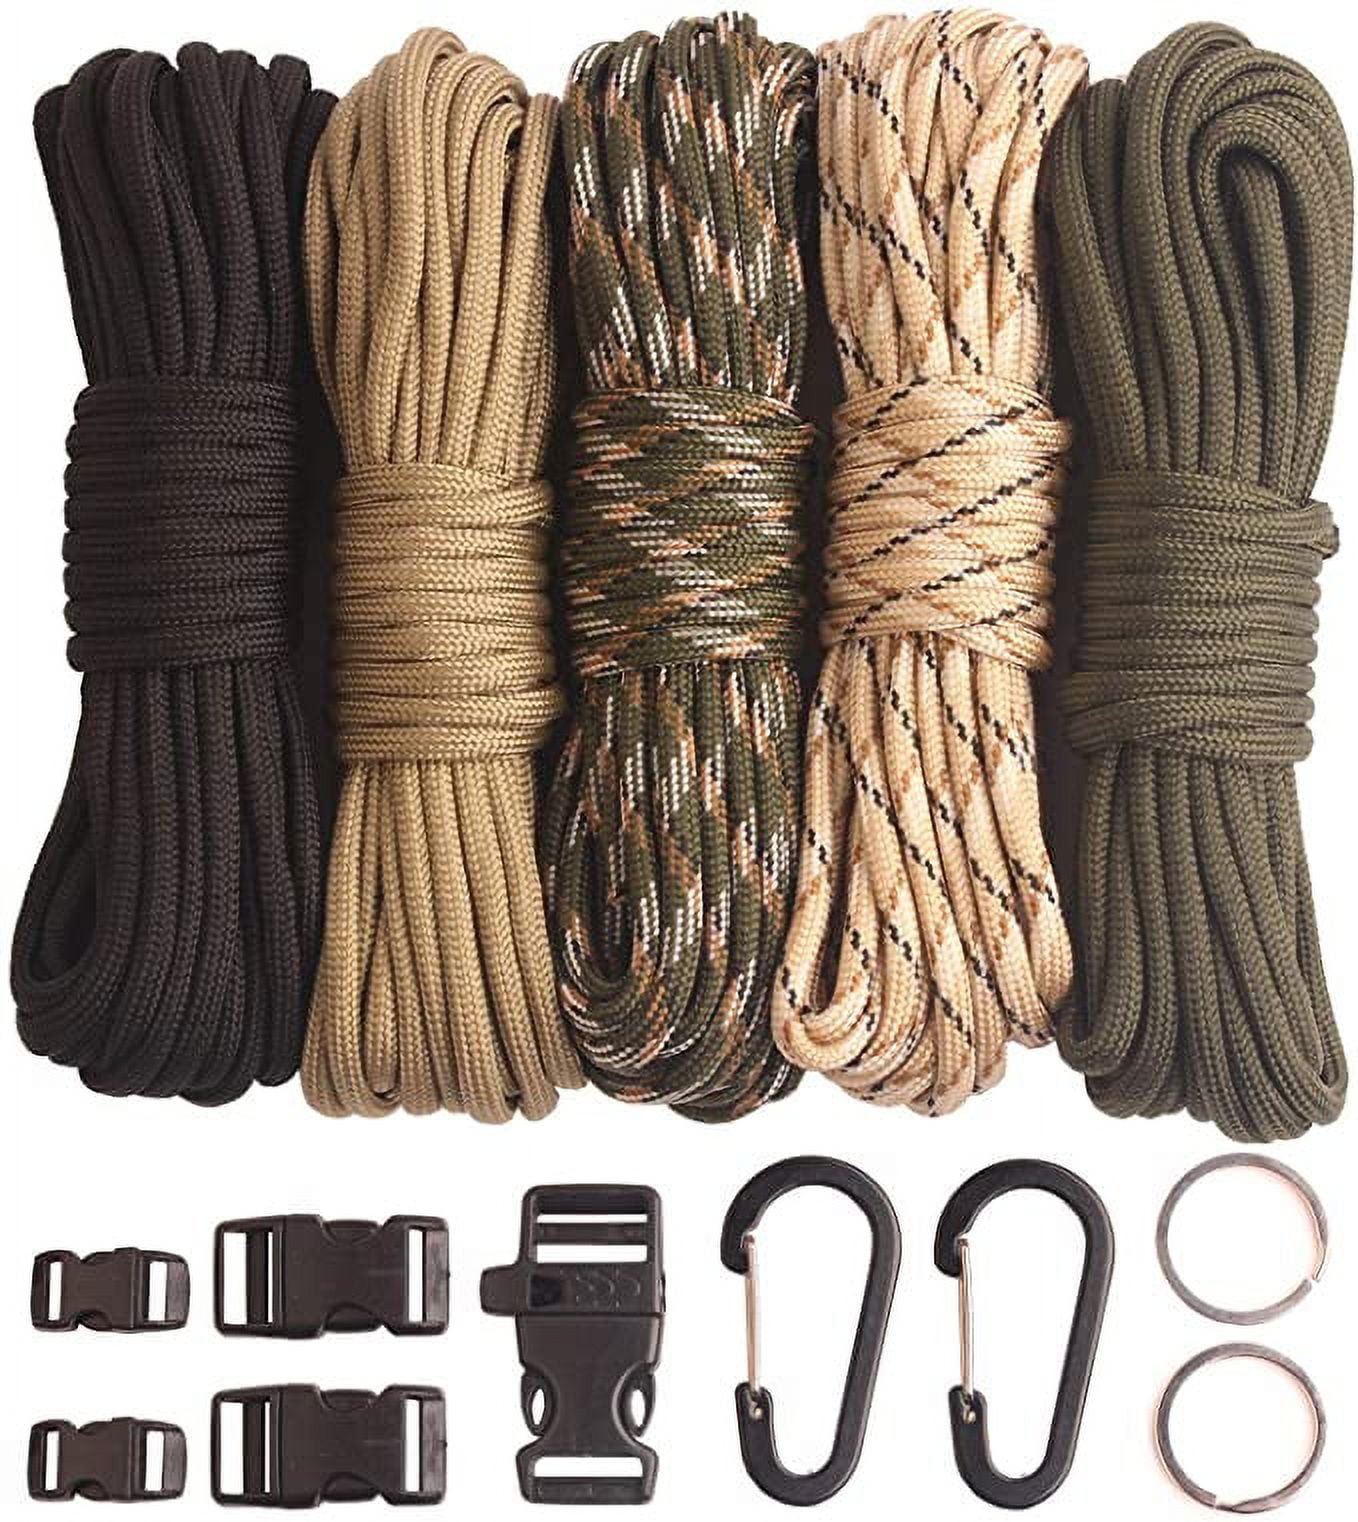 Paracord Rope 10Pcs Paracord Bracelet Kit Multifunction Paracord Ropes Paracord  Kit 4mm with 10 Pcs Colorful Paracord Buckles for DIY Bracelets Keychains  Camping and Others